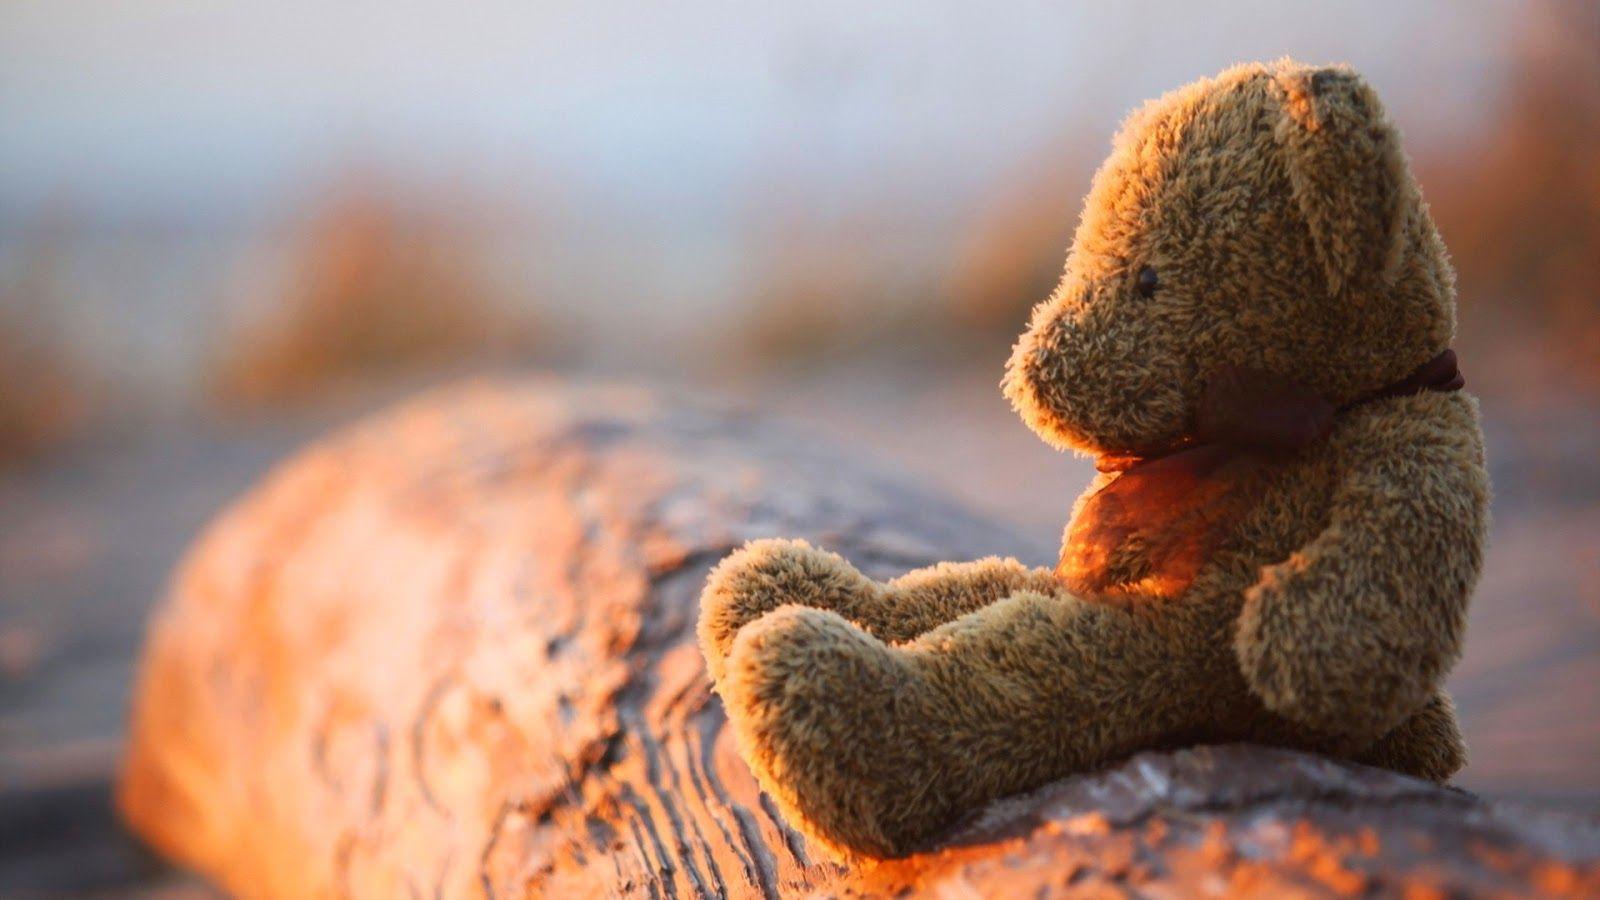 Picture of sad teddy bear lost & lonely feeling after love break up